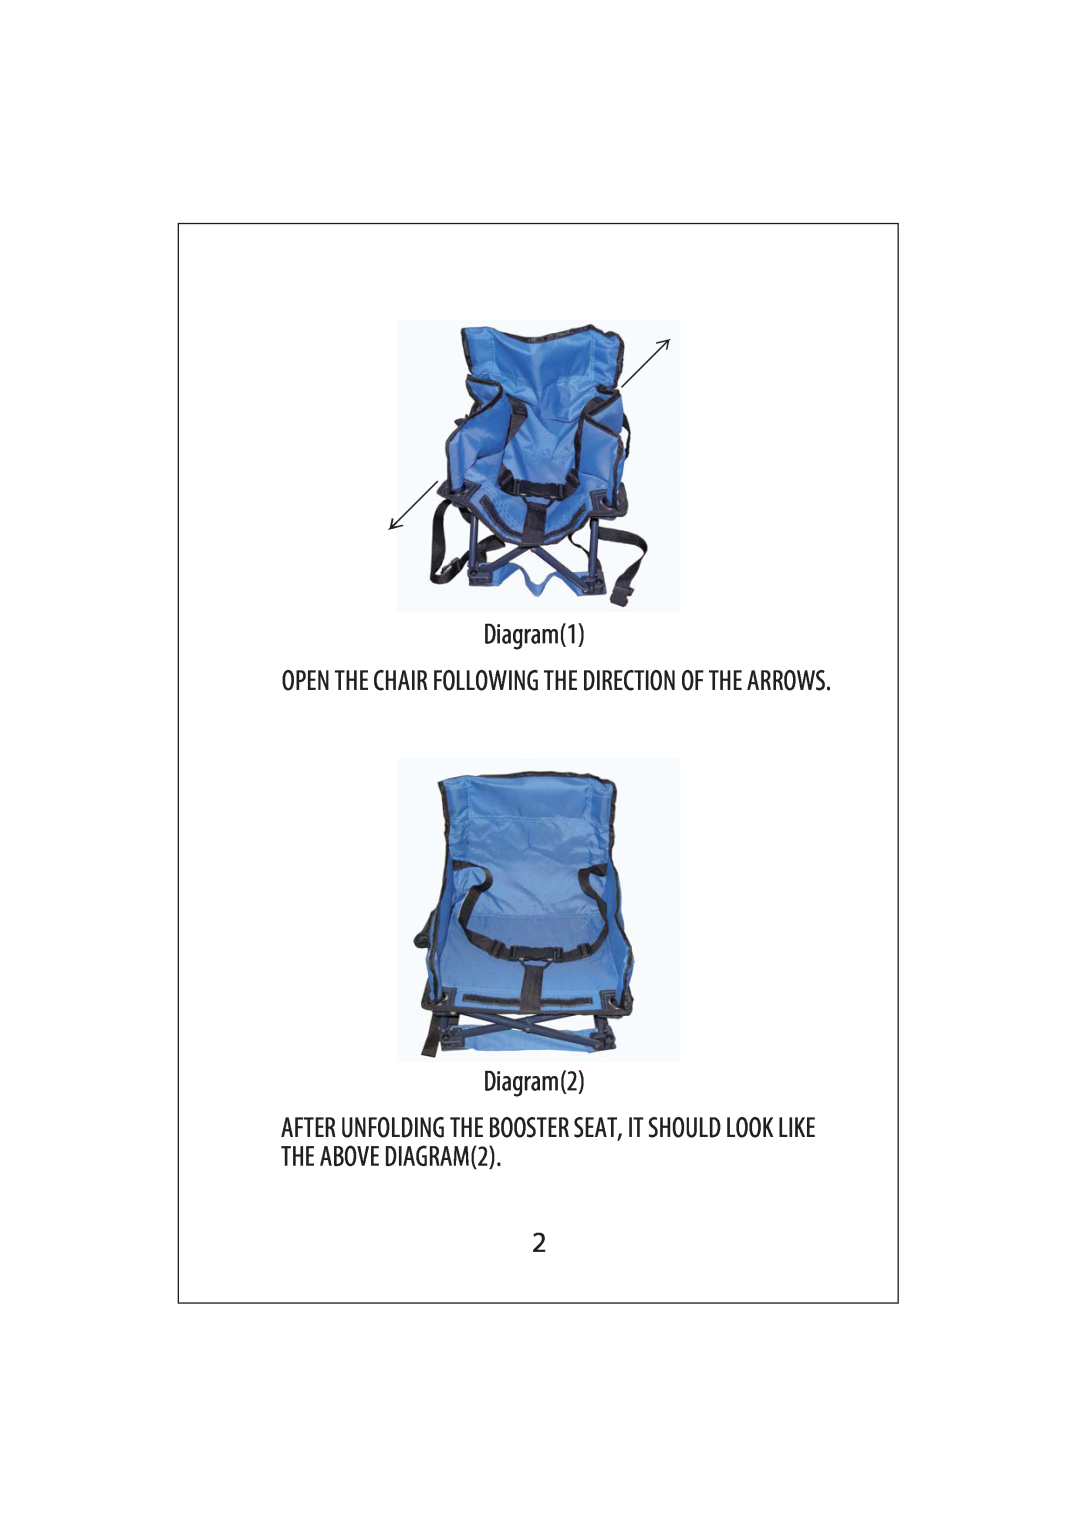 Regalo 3510 owner manual Diagram1, Diagram2, Open The Chair Following The Direction Of The Arrows 